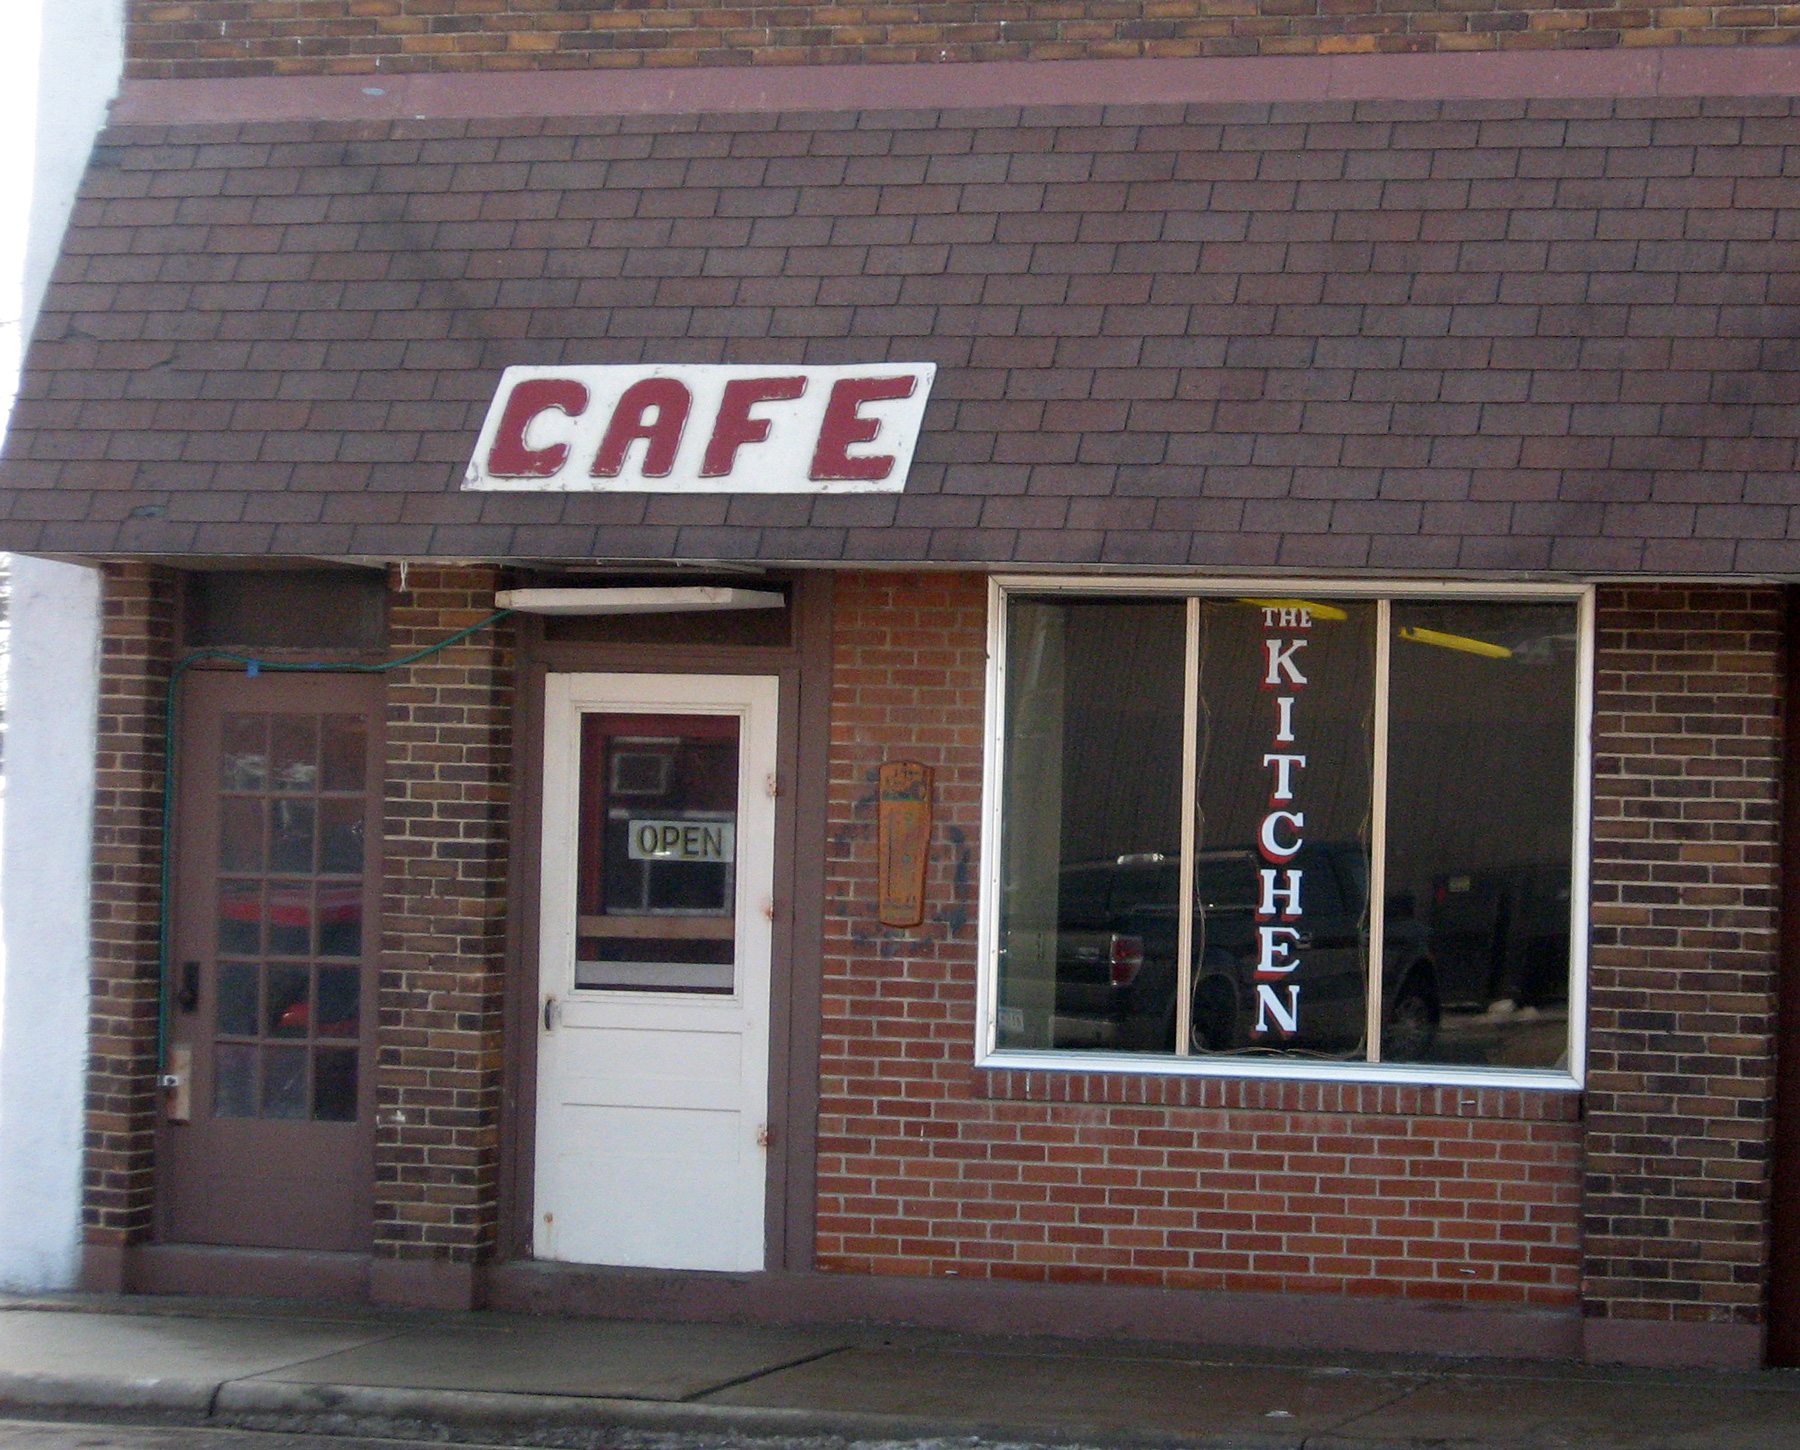 The Inadvertent Cafe, shortly after its opening in 2013.